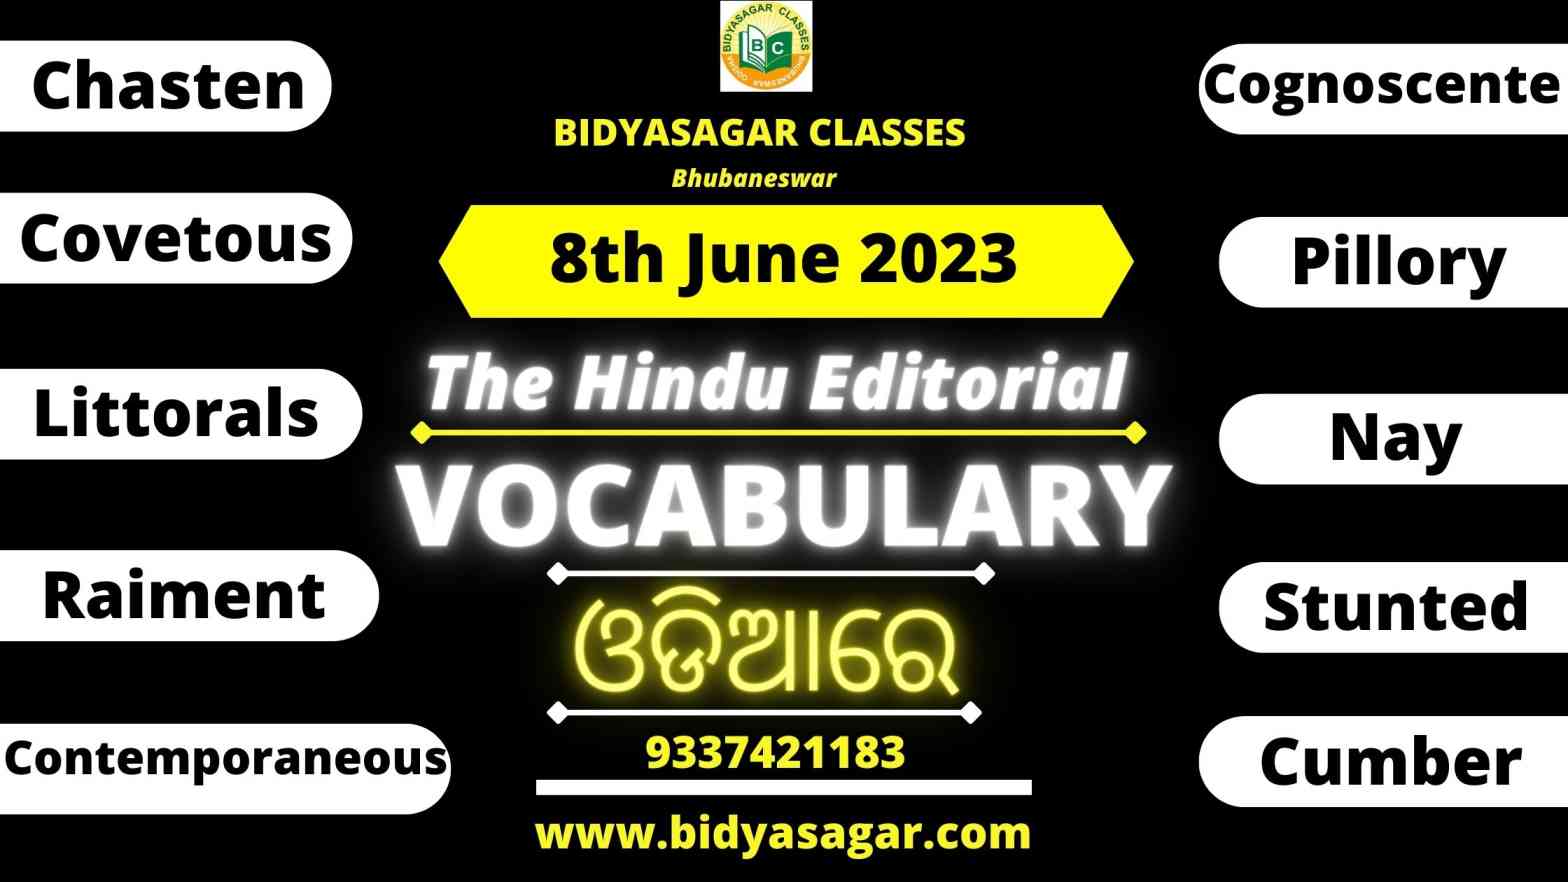 The Hindu Editorial Vocabulary of 8th June 2023